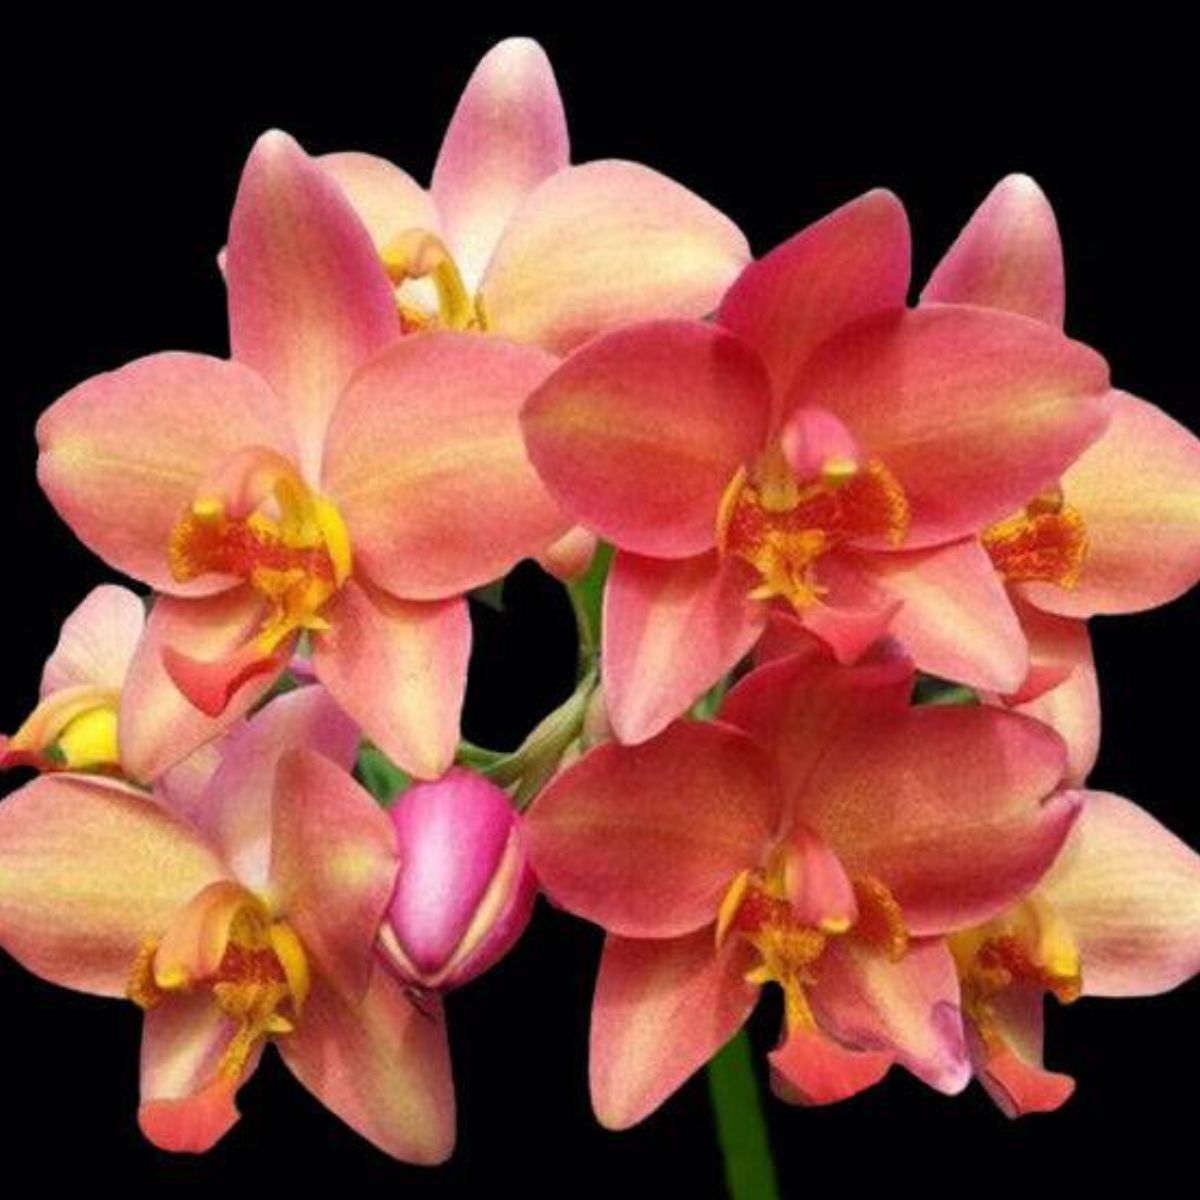 The Spathoglottis Sunshine Orange orchid typically features medium-sized blooms. The flowers are known for their vibrant and eye-catching orange color, resembling the warmth and radiance of the sun. The petals have a smooth and velvety texture, enhancing the allure of the flower.